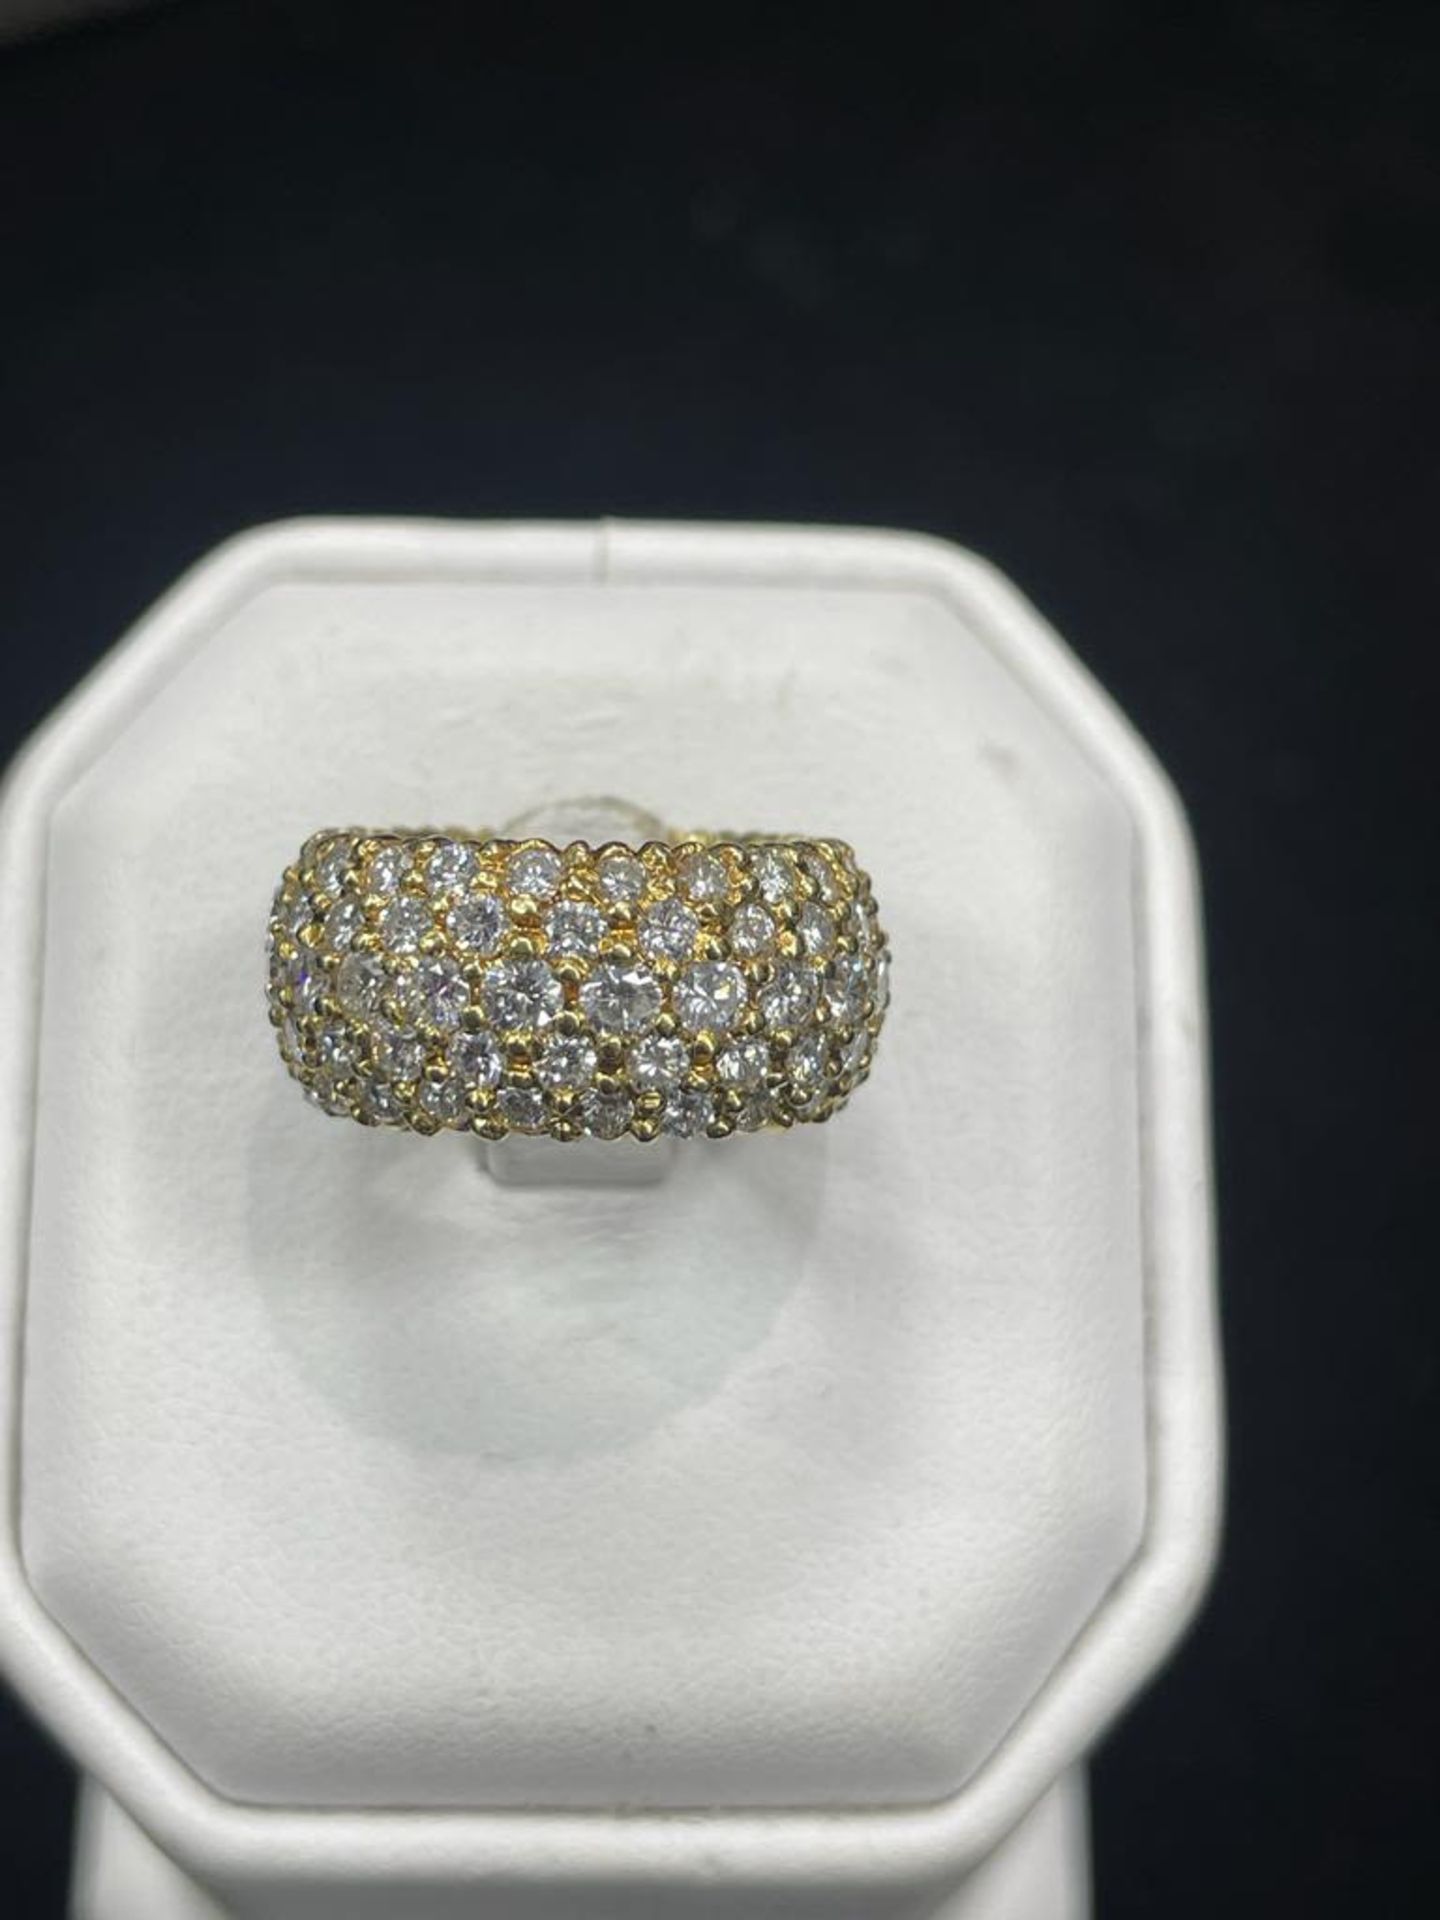 4.40CT DIAMOND RING (ROUND BRILLIANT CUT) - SET IN YELLOW GOLD (TOTAL WEIGHT: 7.90g) - Image 3 of 4